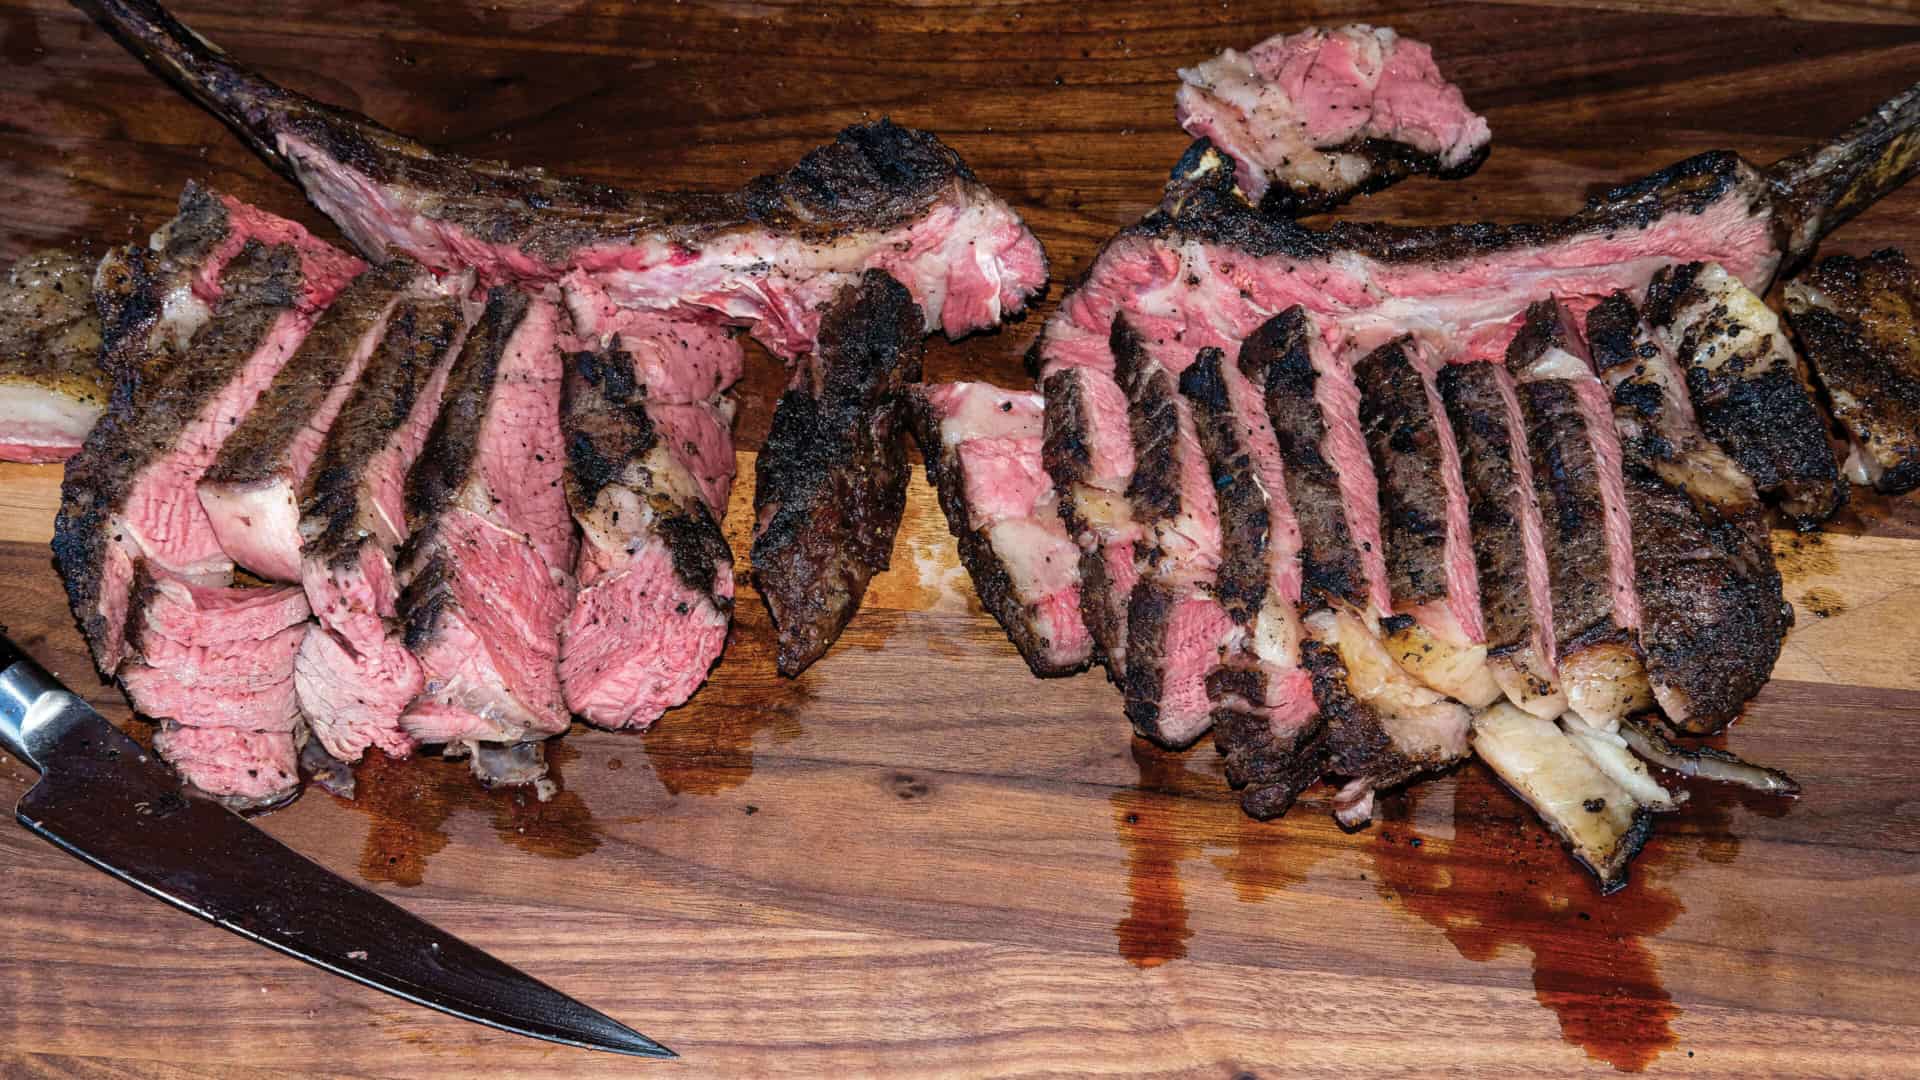 Grilled Tomahawk steaks recipe and video from Ballistic BBQ